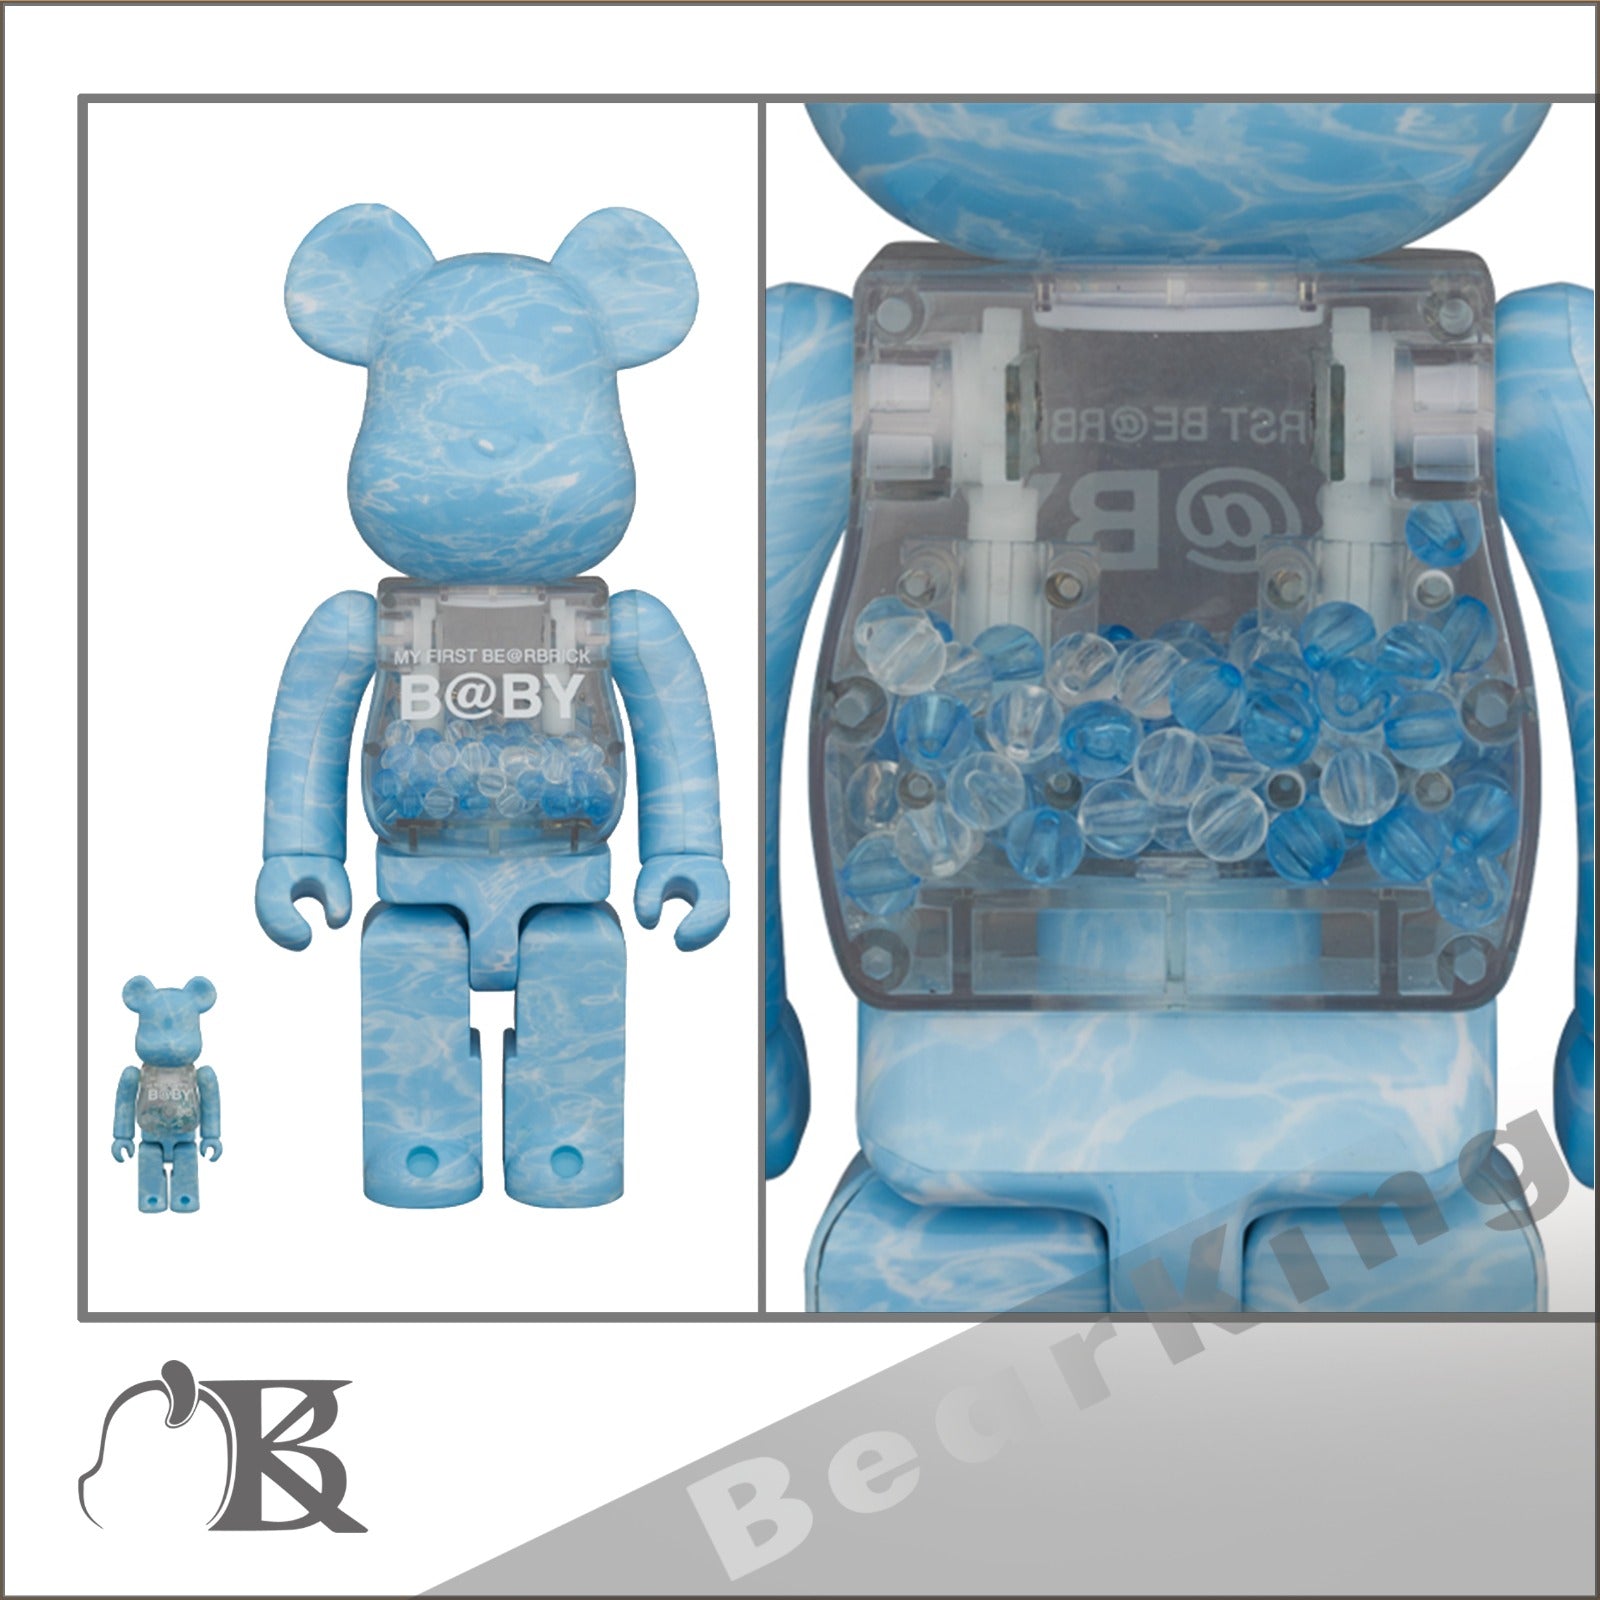 MY FIRST BE@RBRICK B@BY MARBLE 大理石　セット